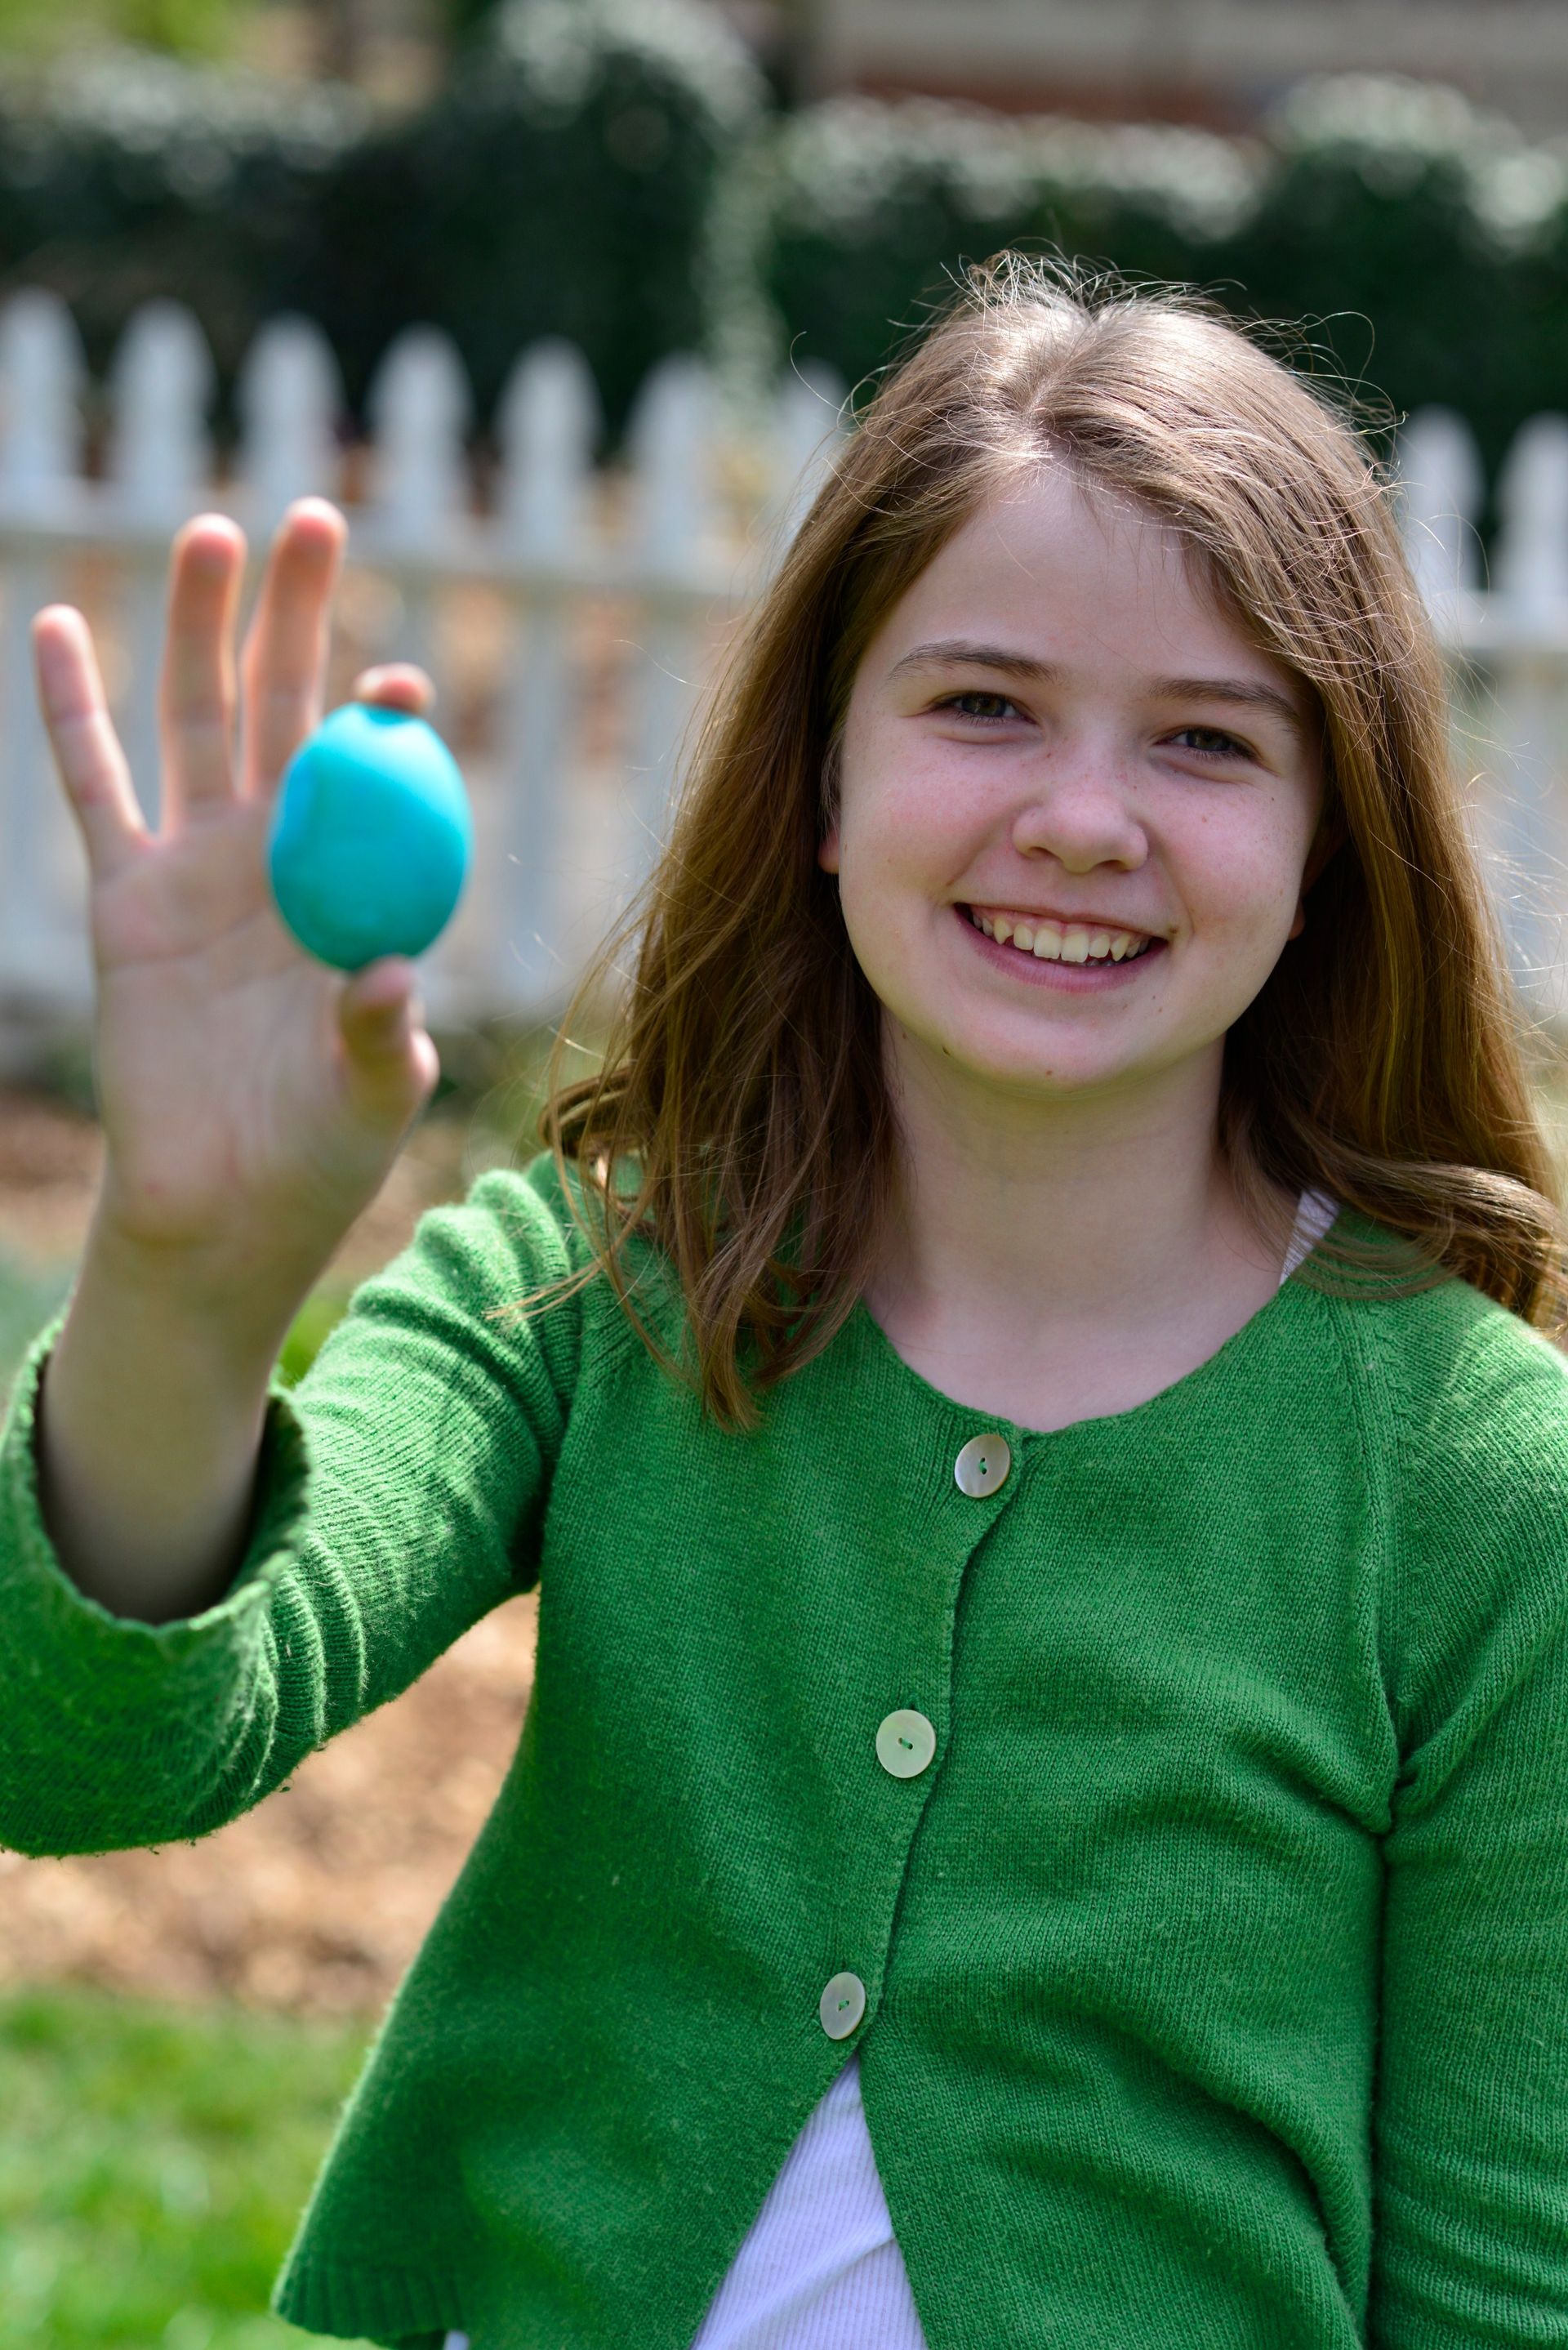 A young girl holding up a blue Easter egg outside.